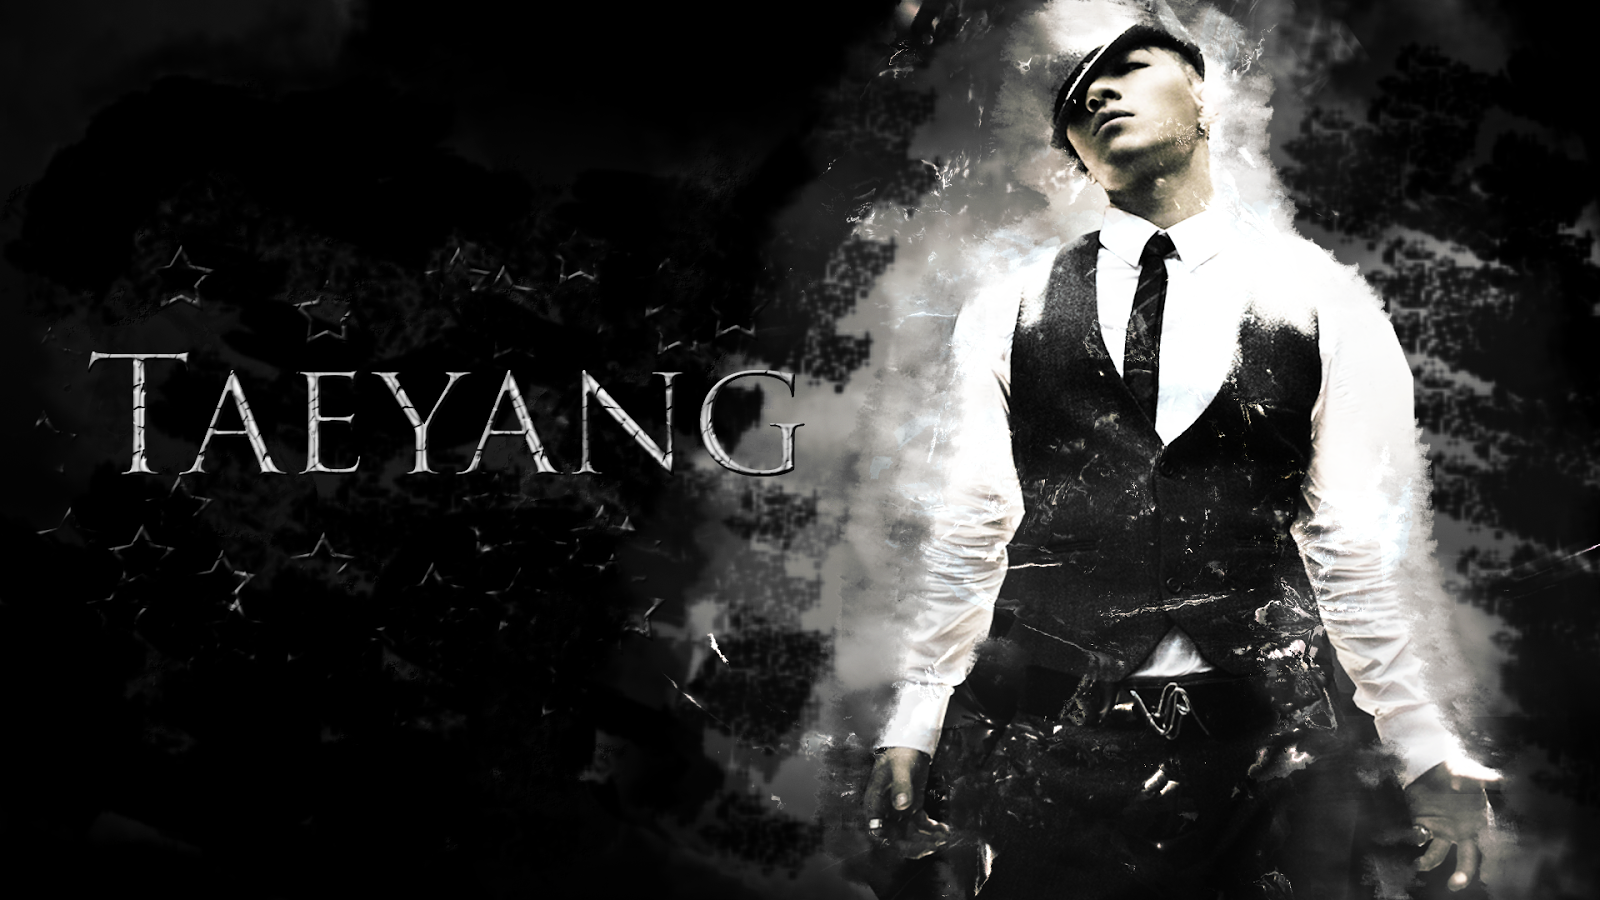 taeyang wallpaper,font,album cover,darkness,black and white,photography